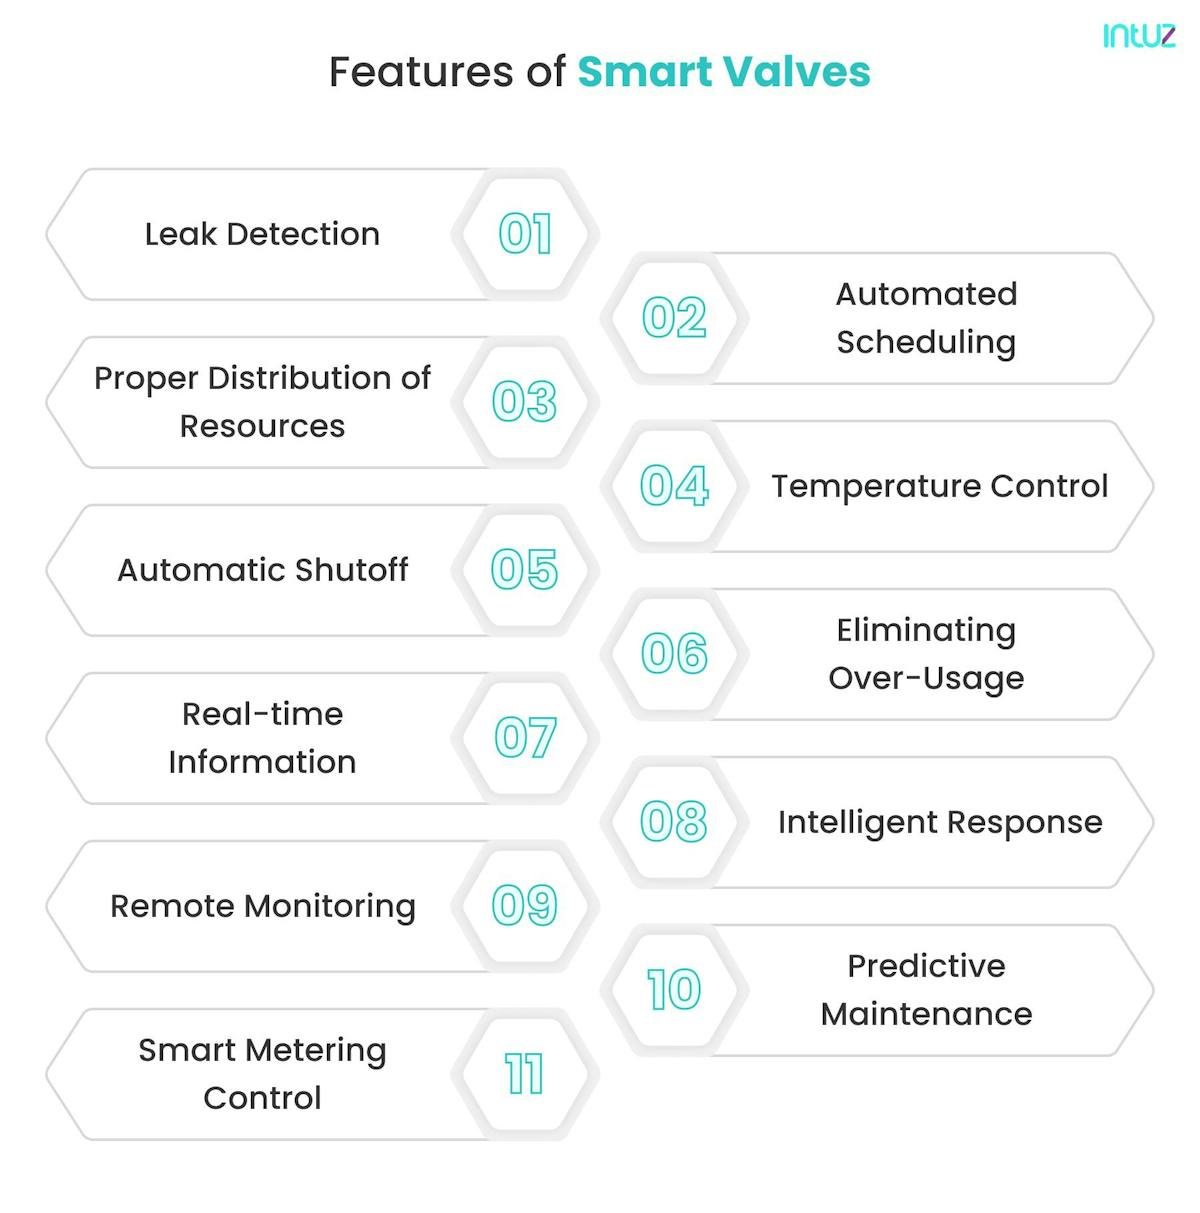 Features of smart valves